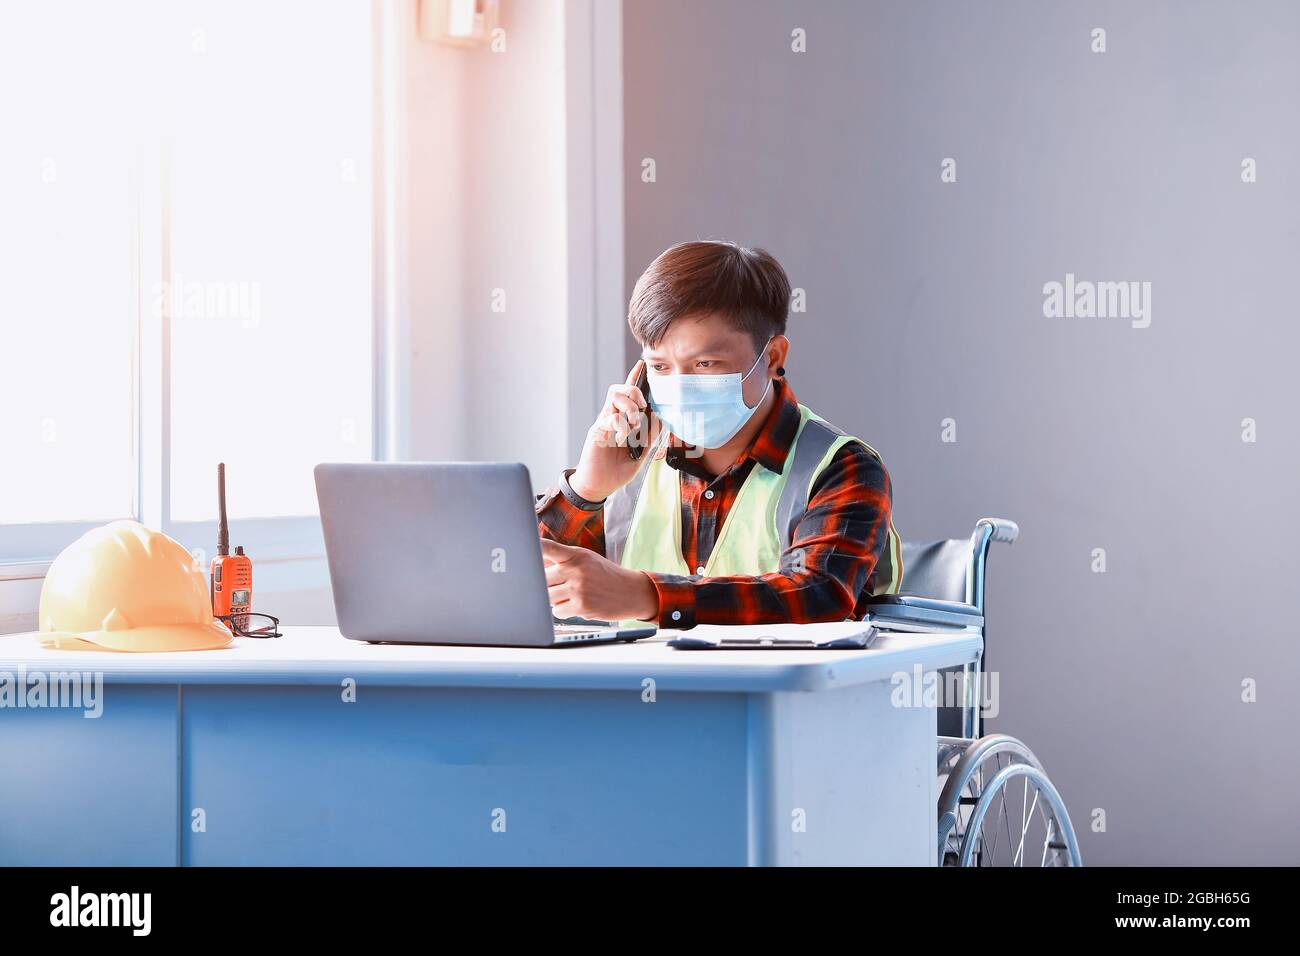 Architect in a wheelchair working at a desk in an office Stock Photo